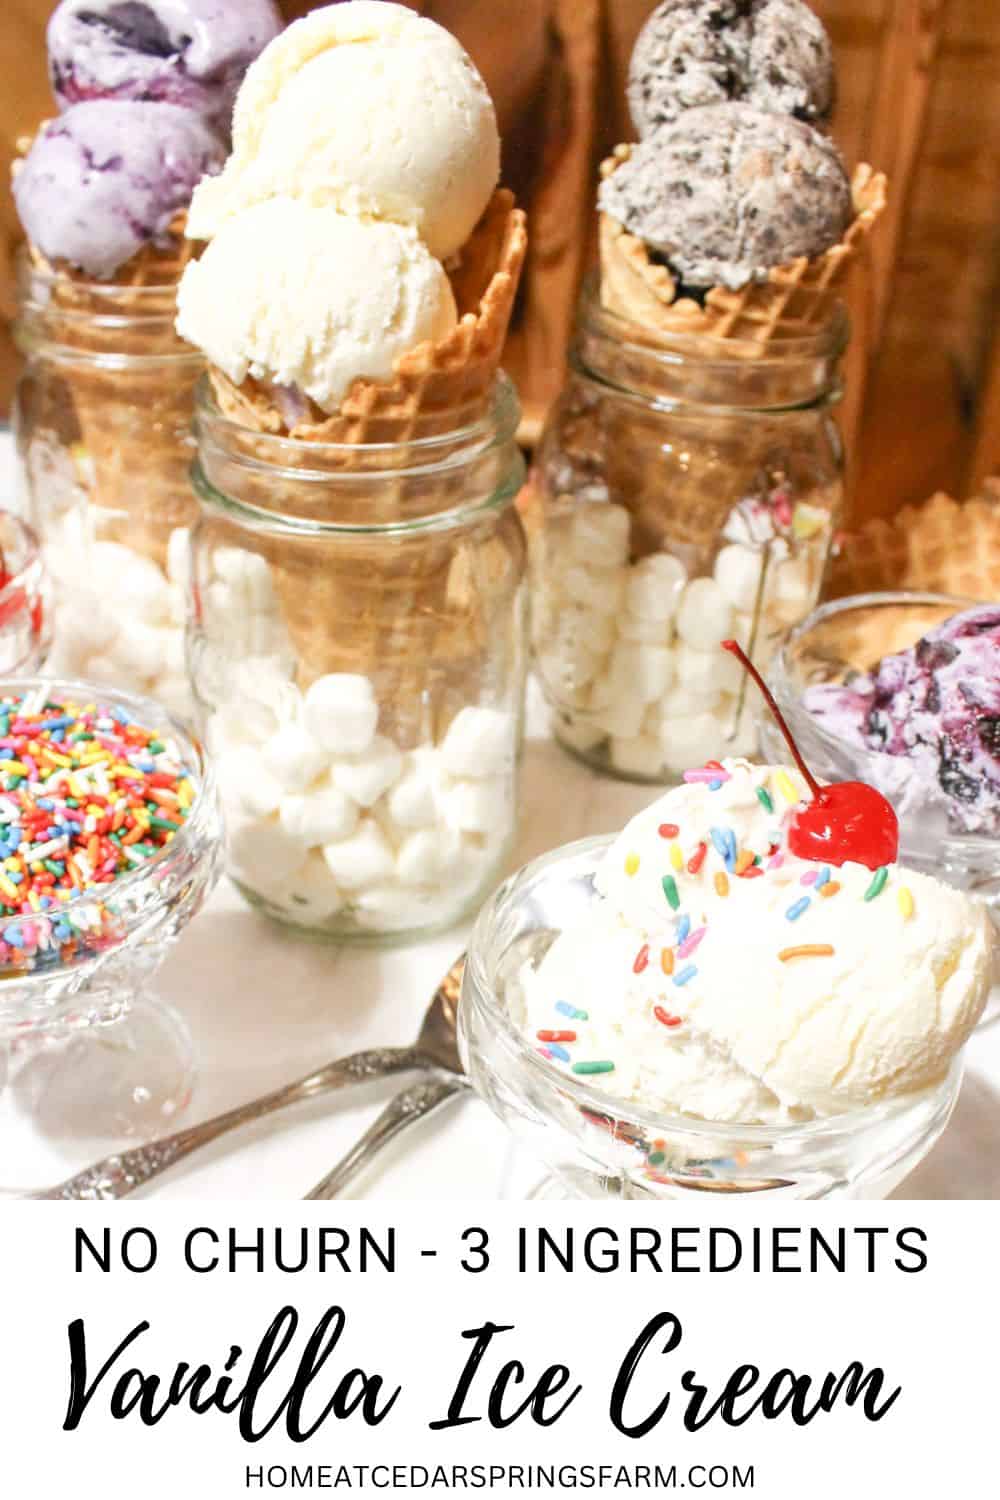 Ice Cream shown in cones and dessert bowls. Vanilla ice cream with a cherry on top and text overlay. No Churn 3 Ingredients Ice Cream.